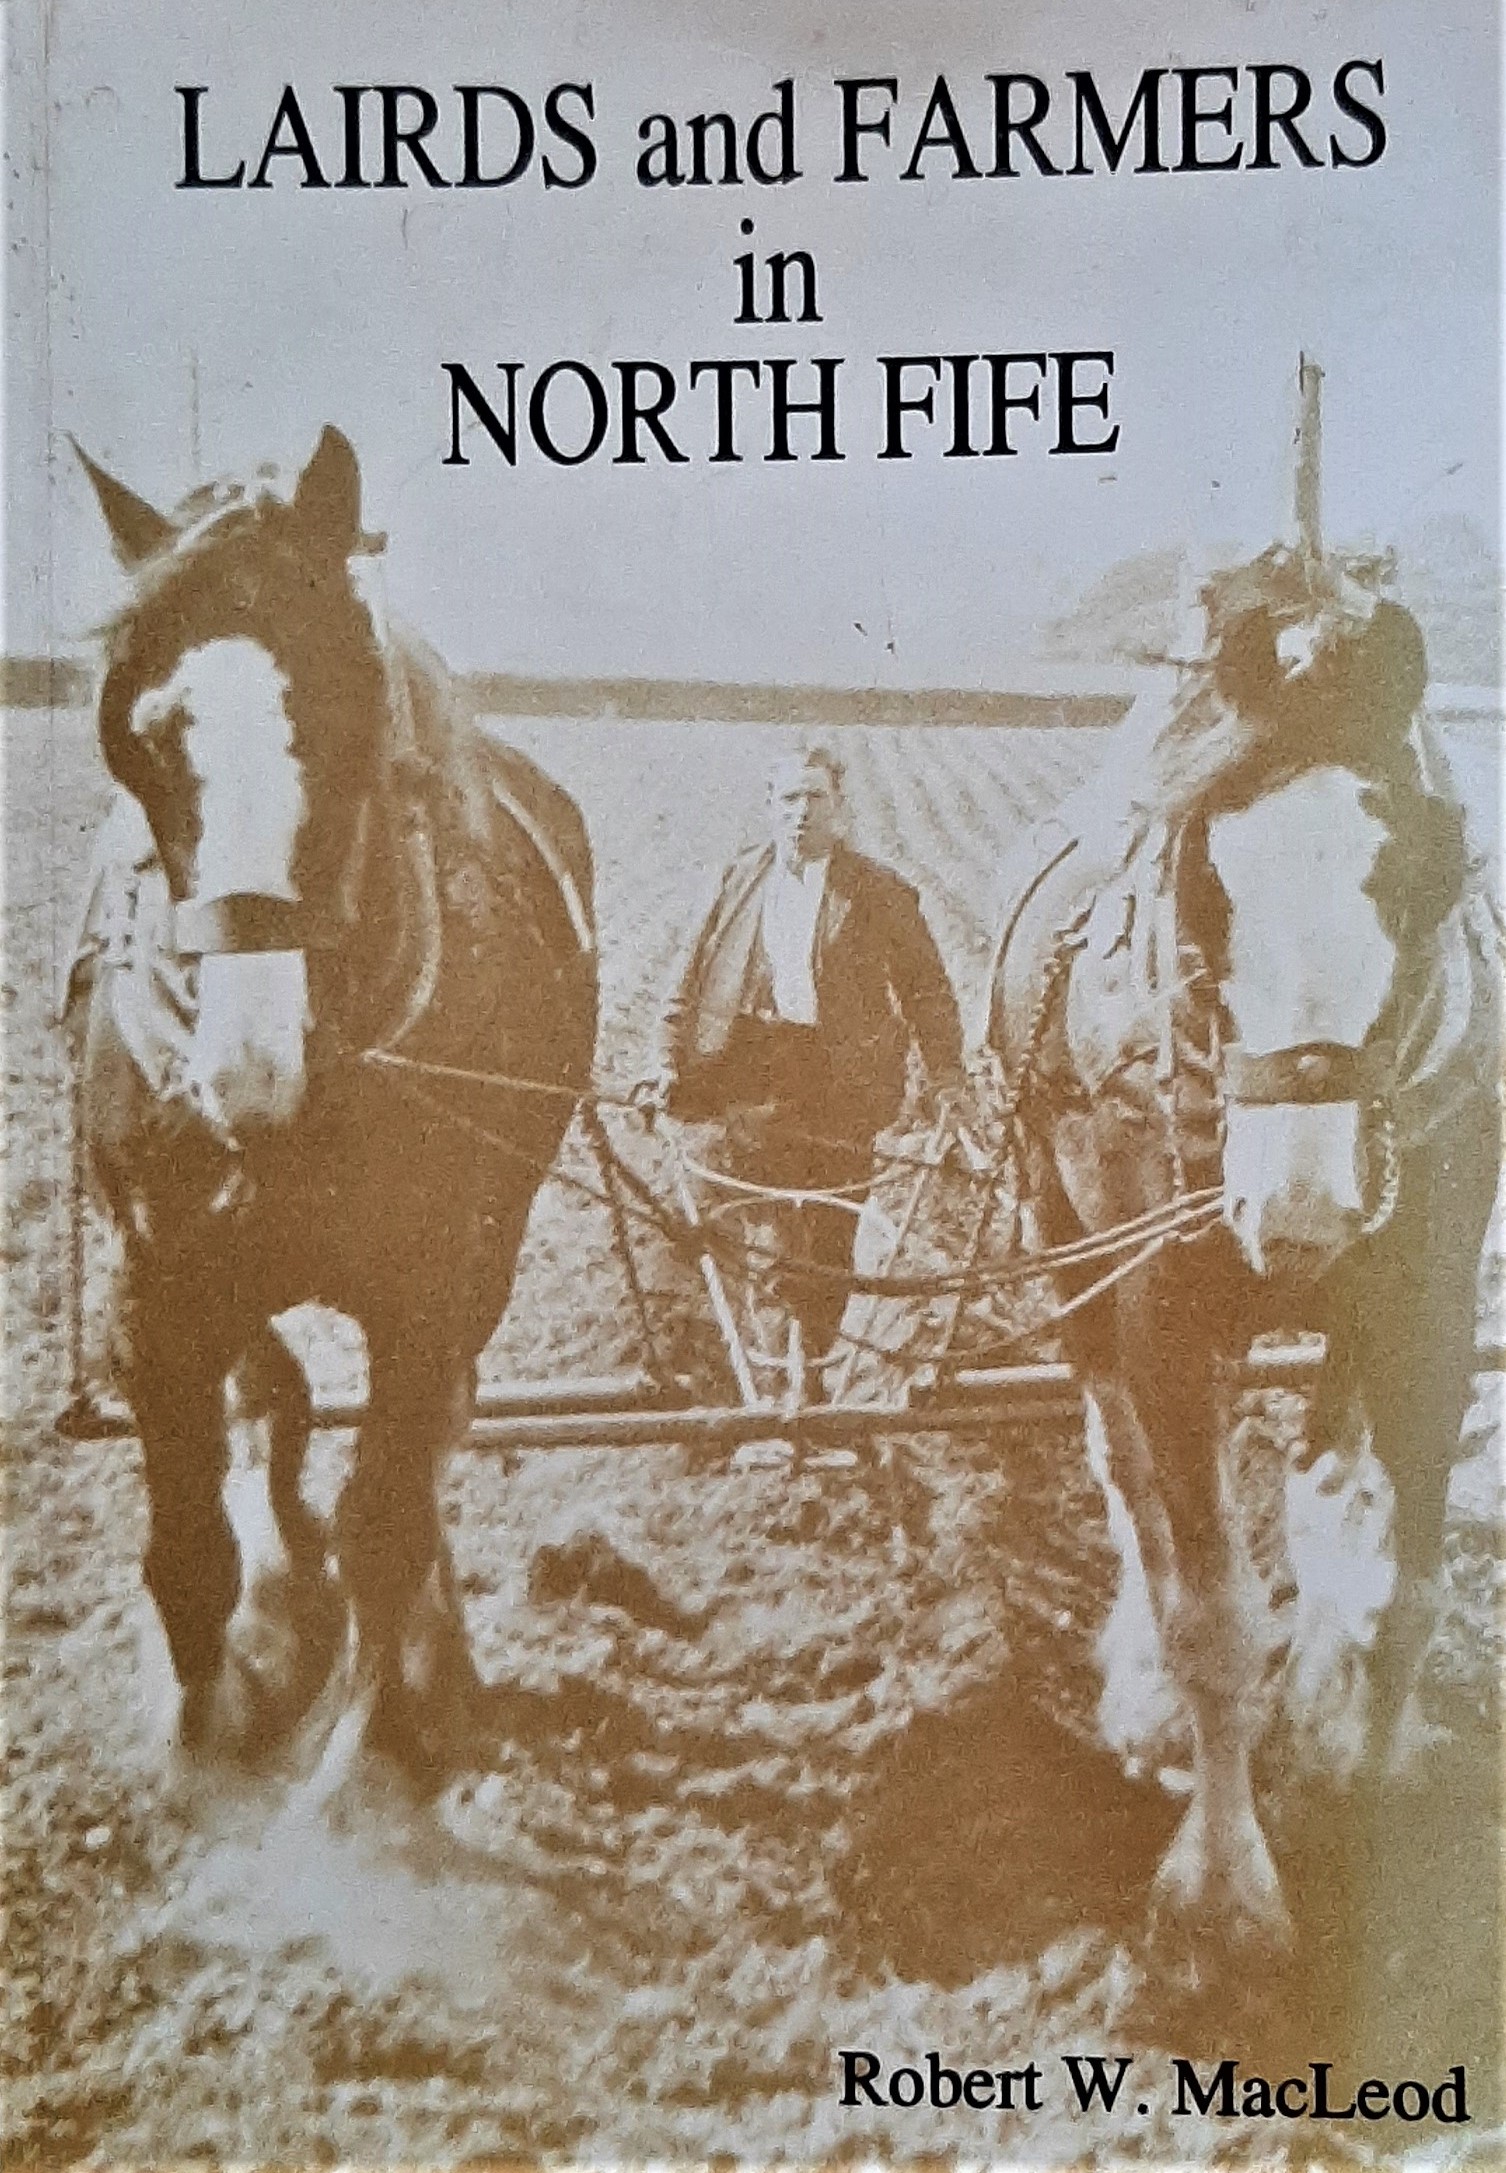 “Lairds & Farmers in North Fife” – Robert MacLeod (1996)